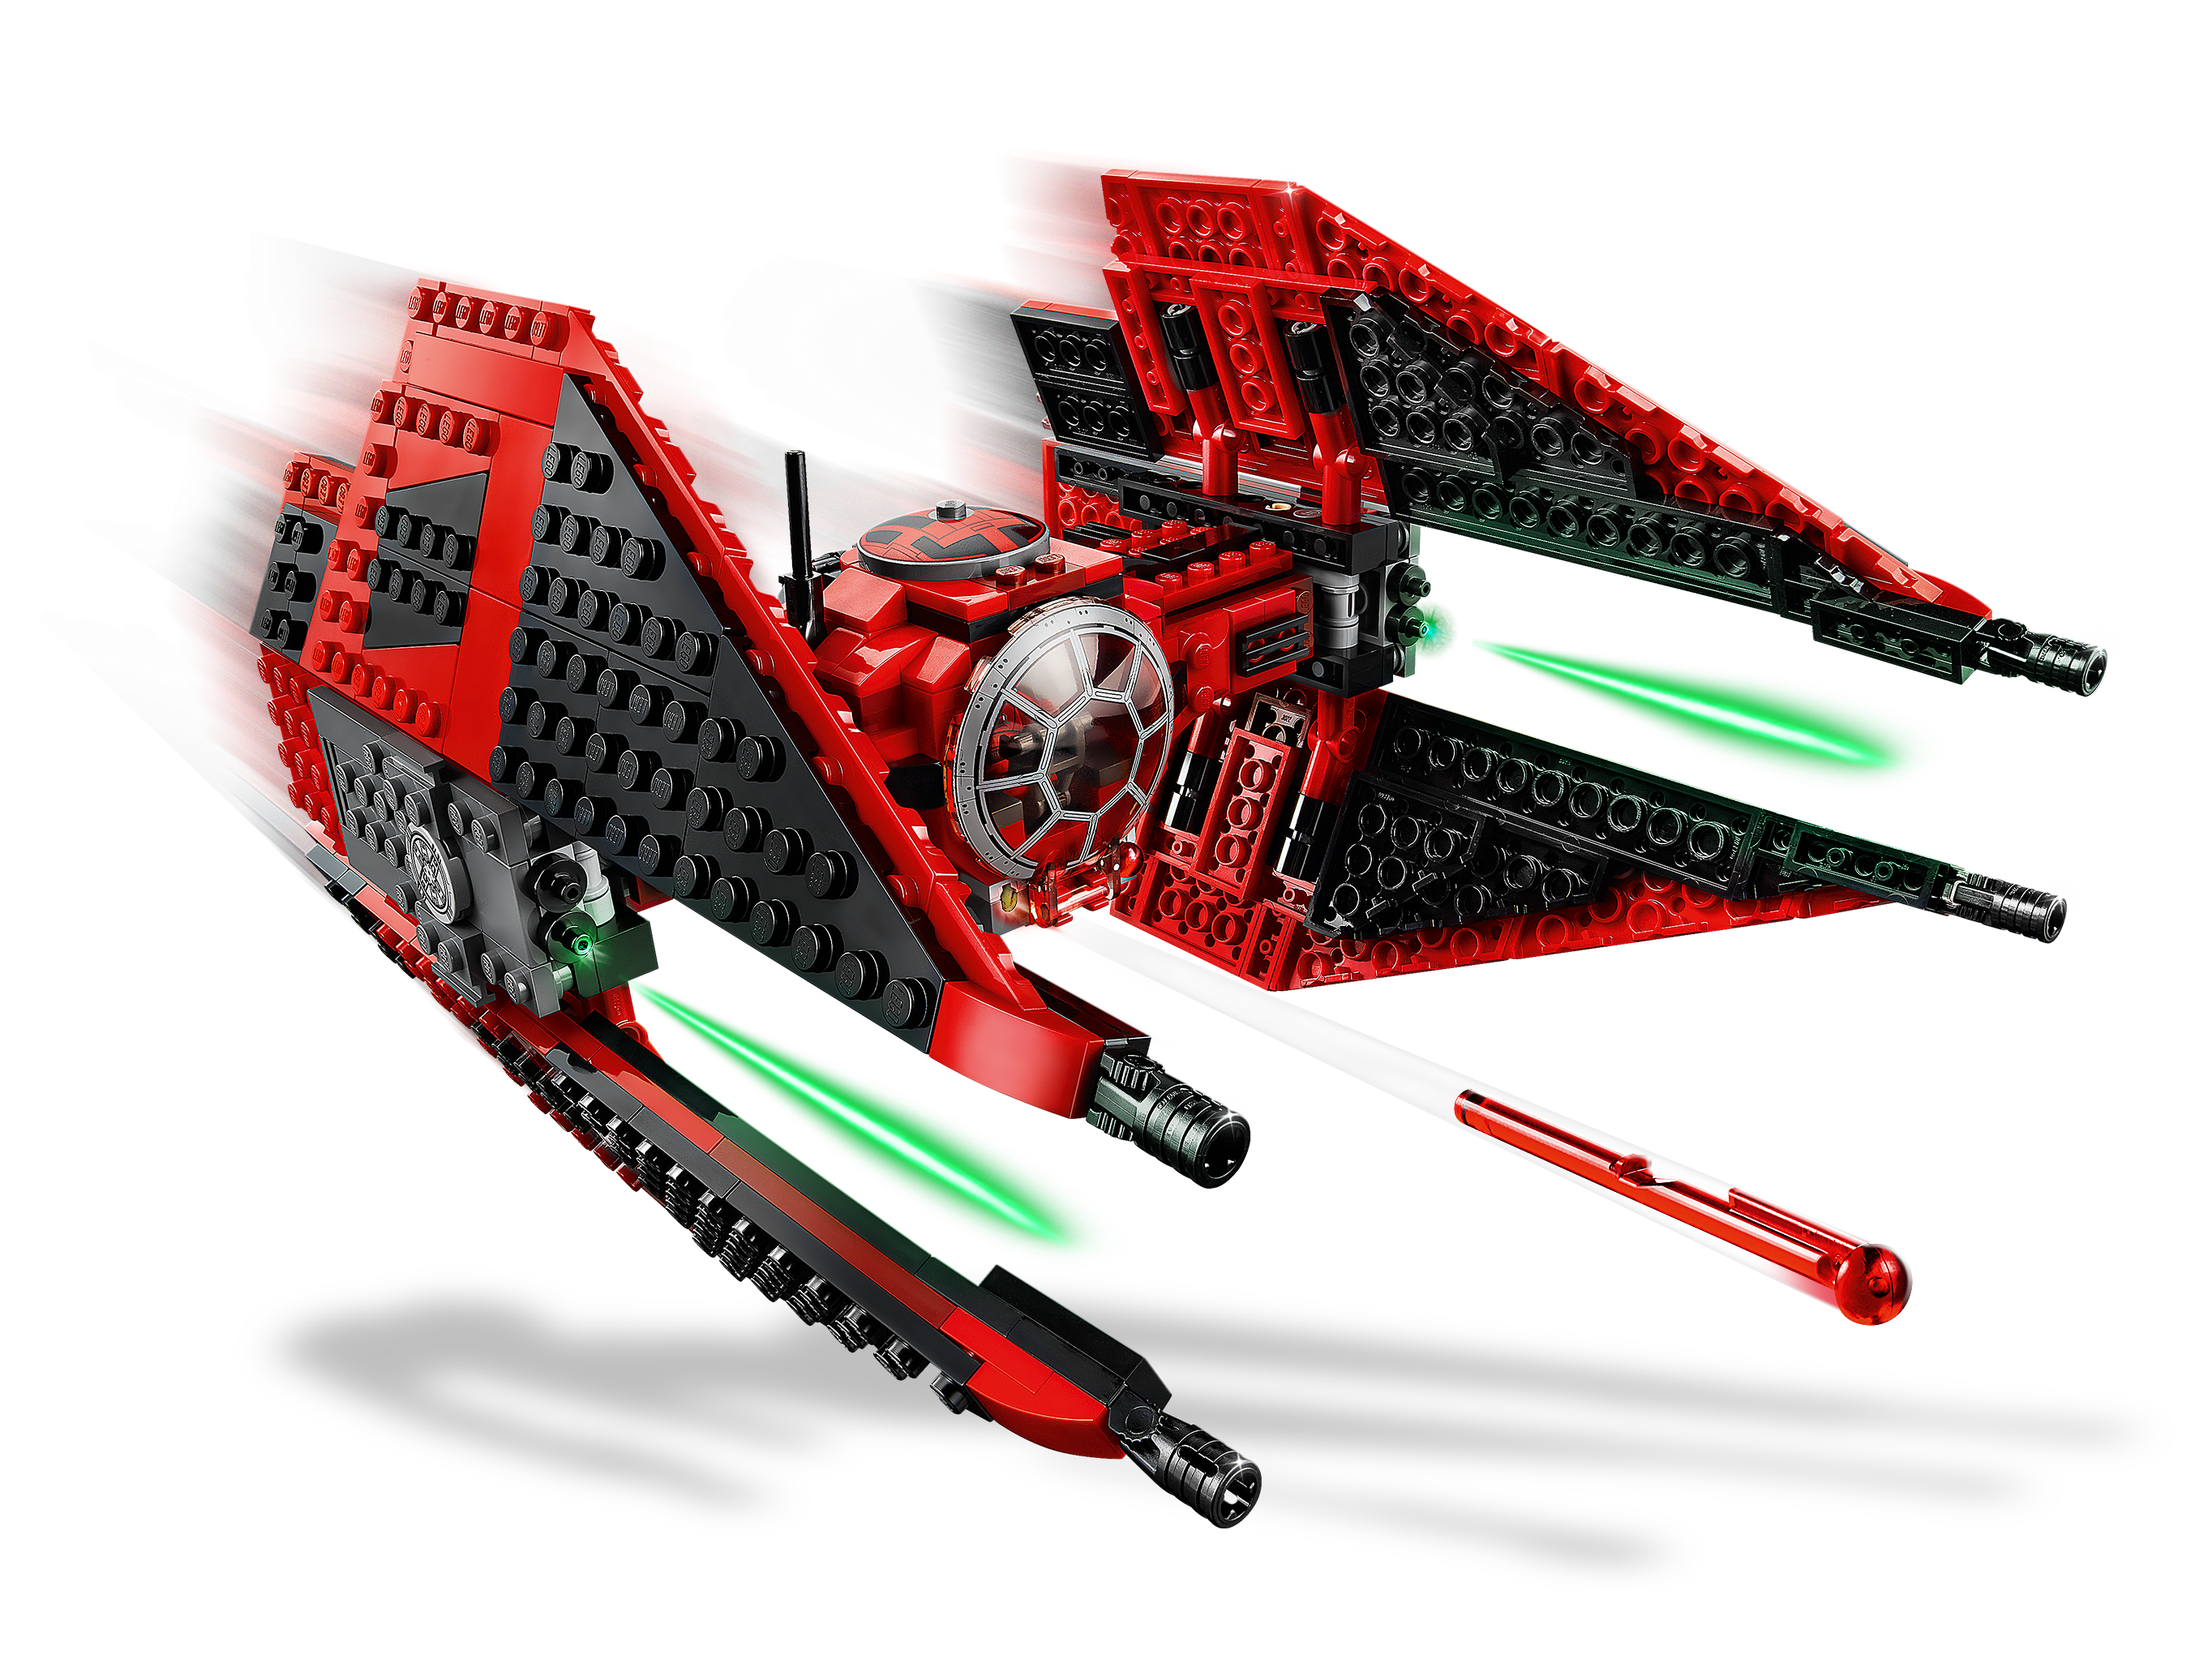 Major Vonreg's TIE Fighter™ 75240 | Star Wars™ | Buy at the Official LEGO® Shop US